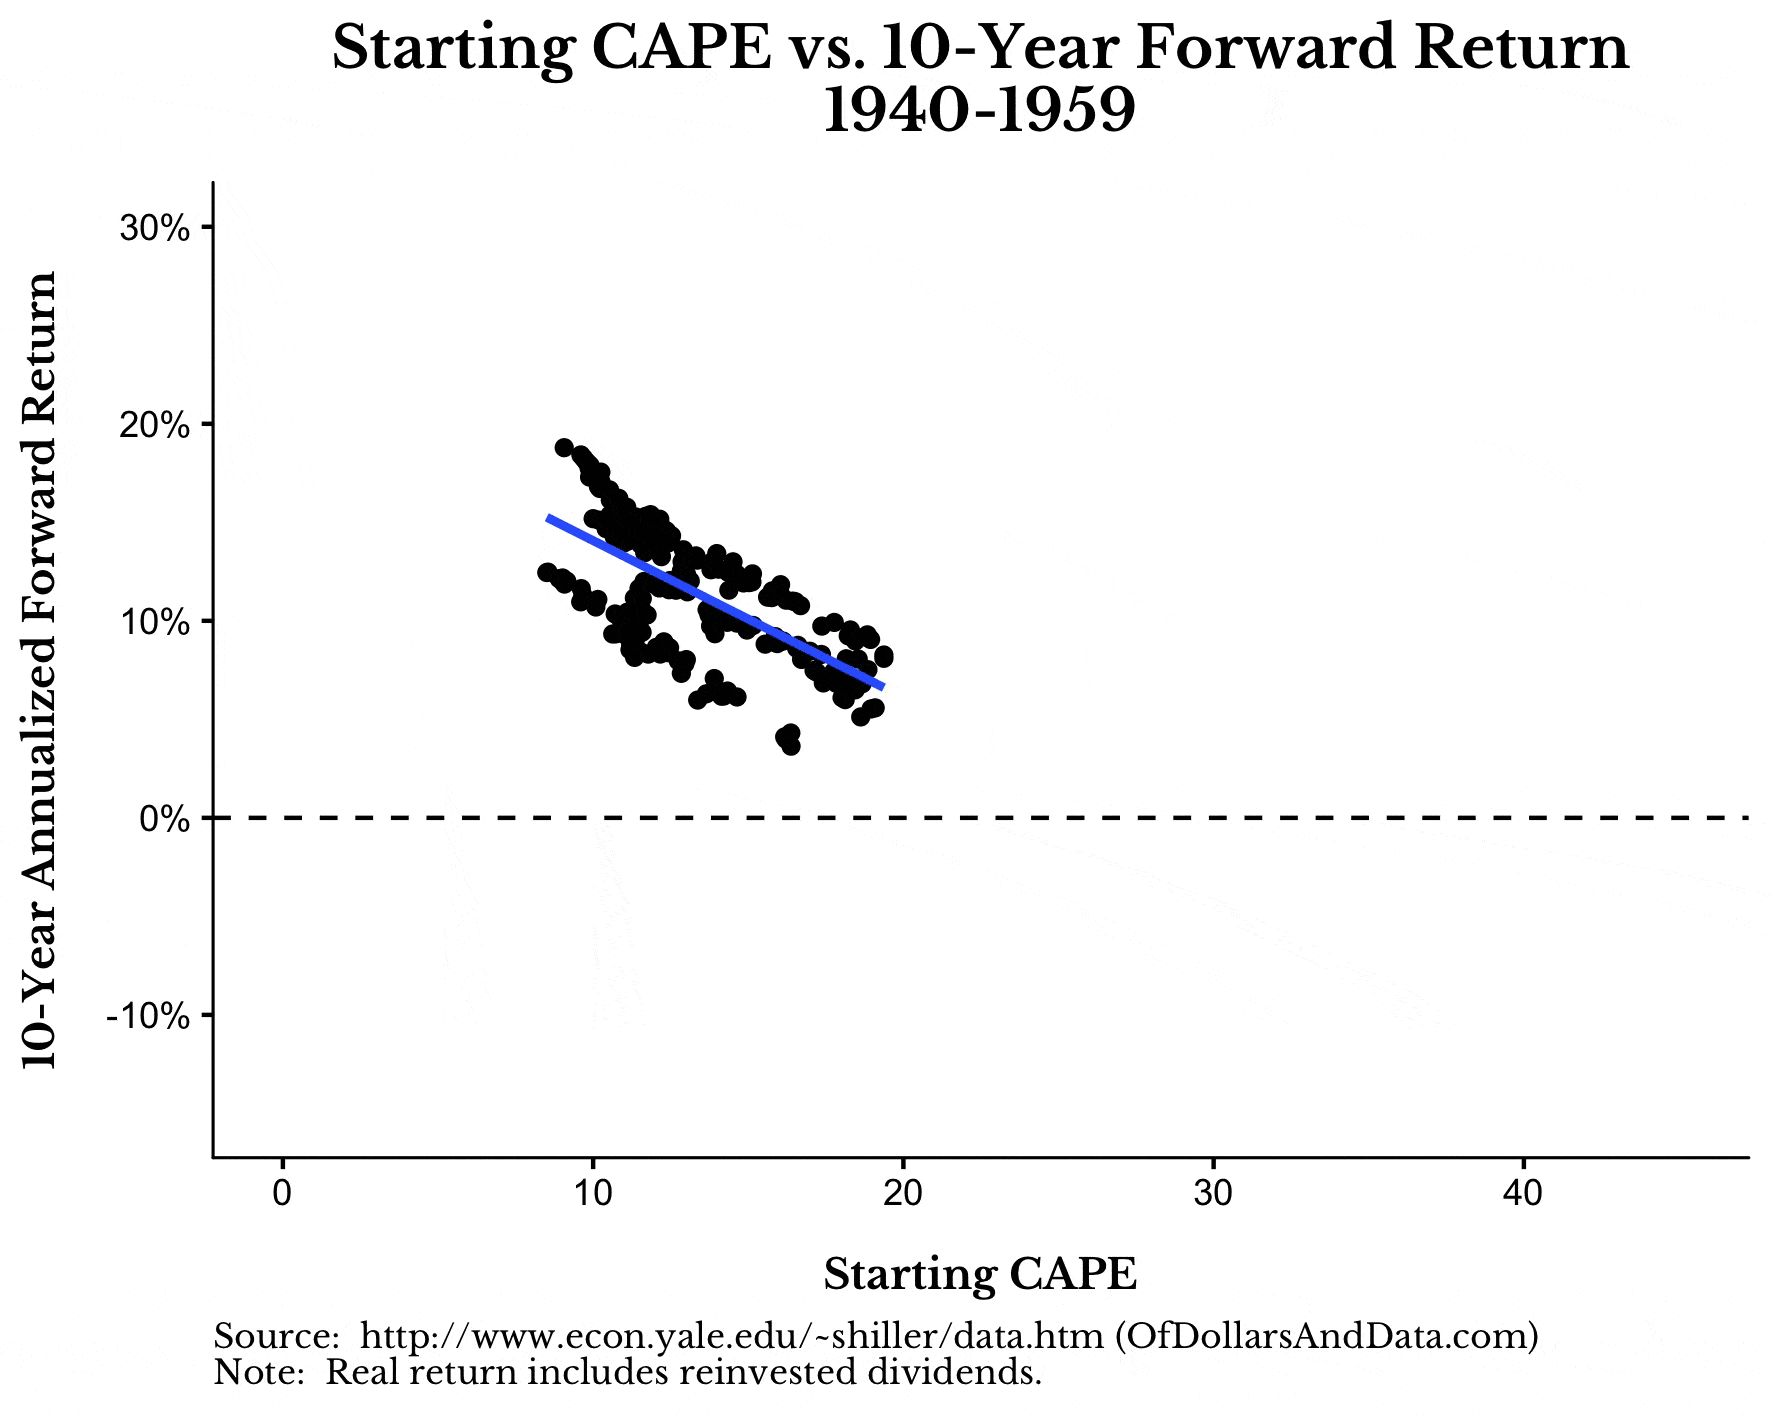 GIF of Starting CAPE vs 10-Year Forward Return for US Stocks for various time periods.